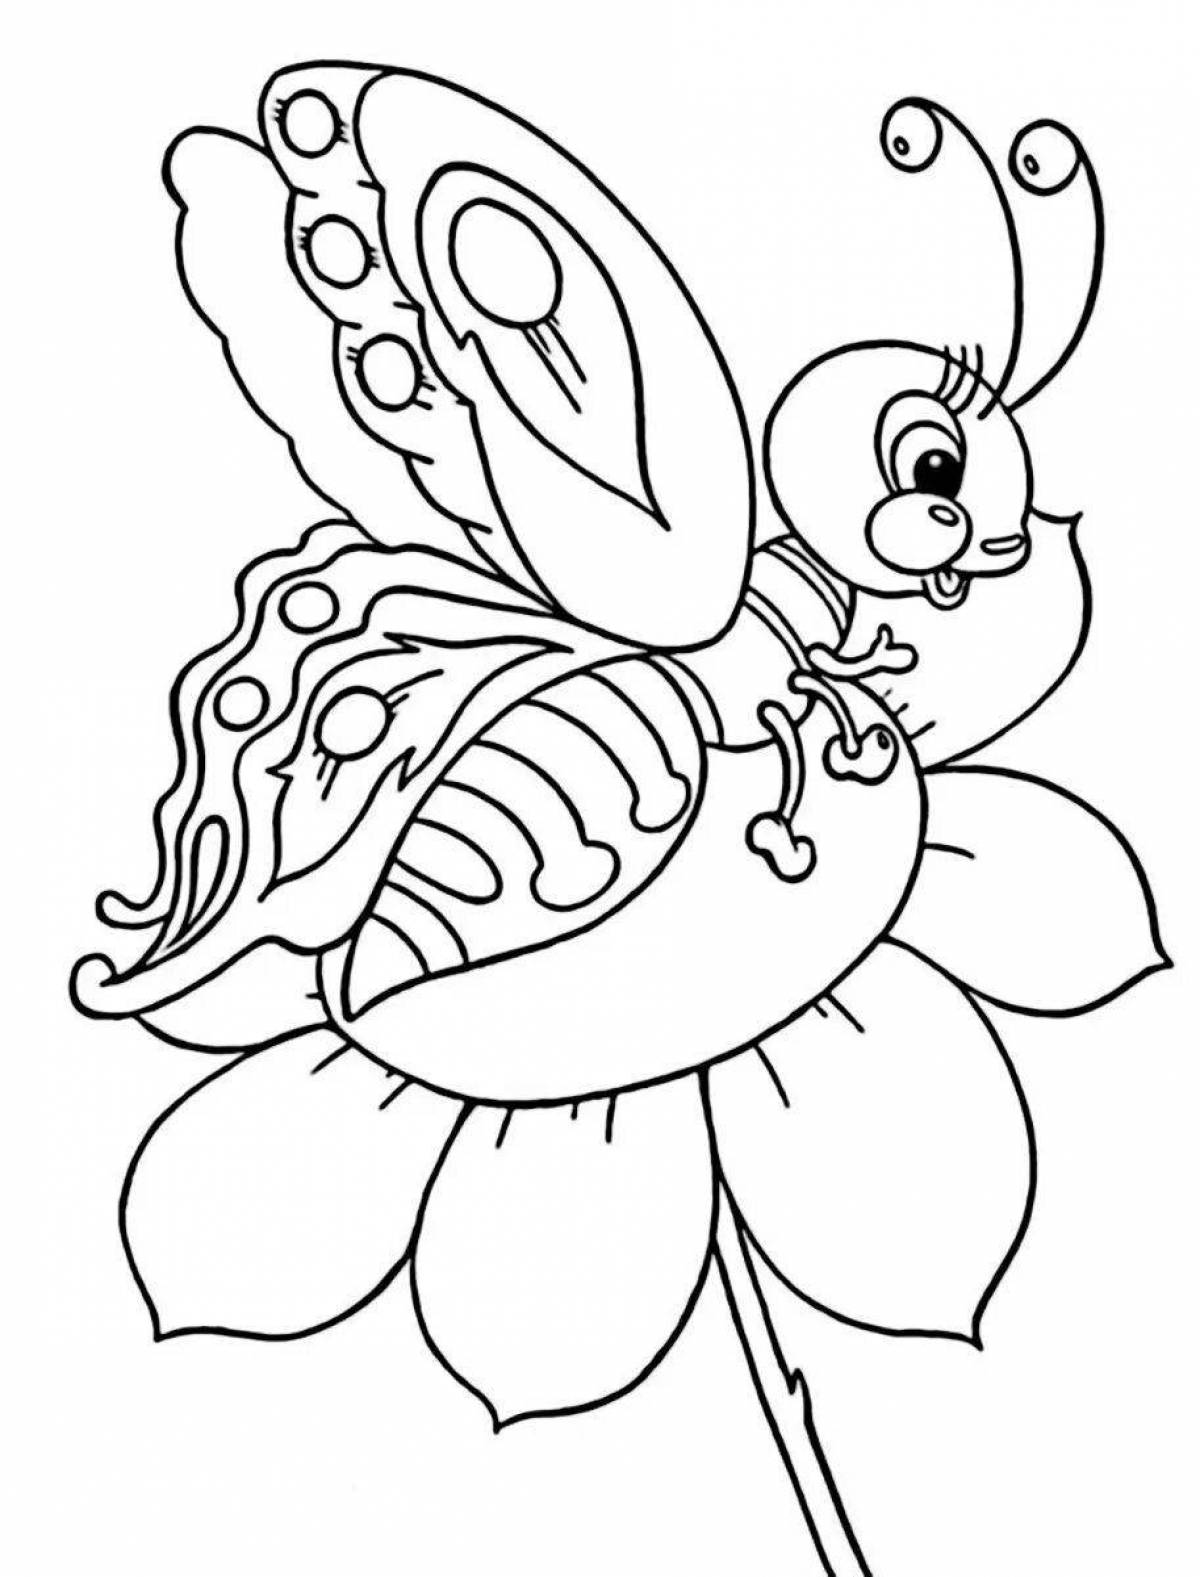 Intriguing coloring book insects